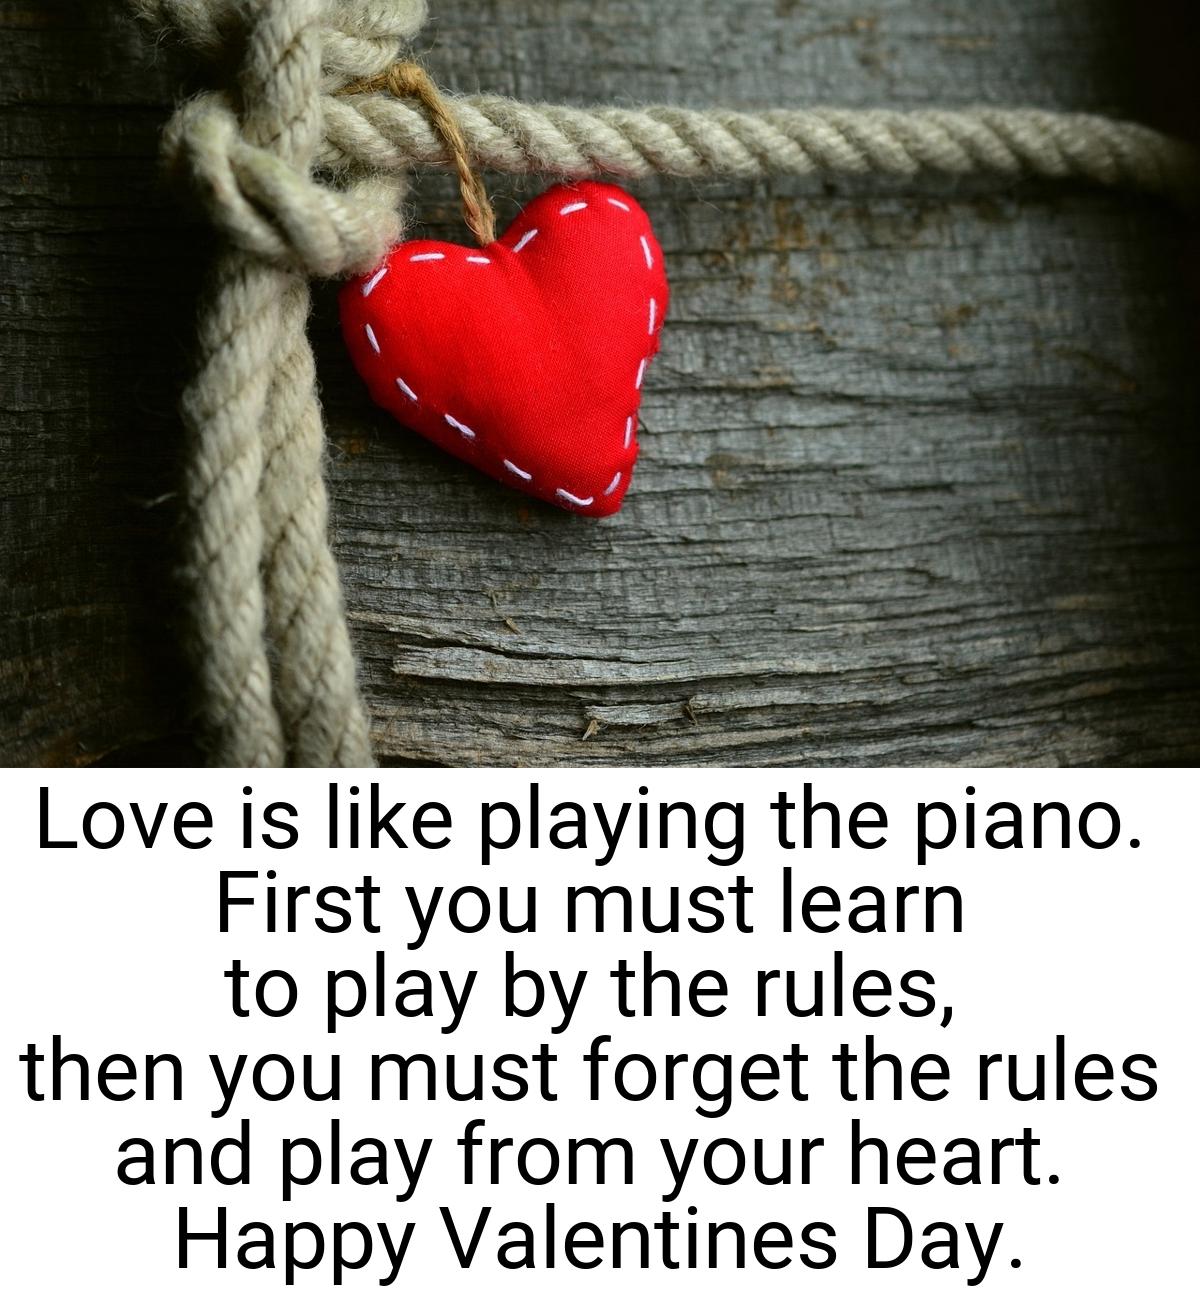 Love is like playing the piano. First you must learn to